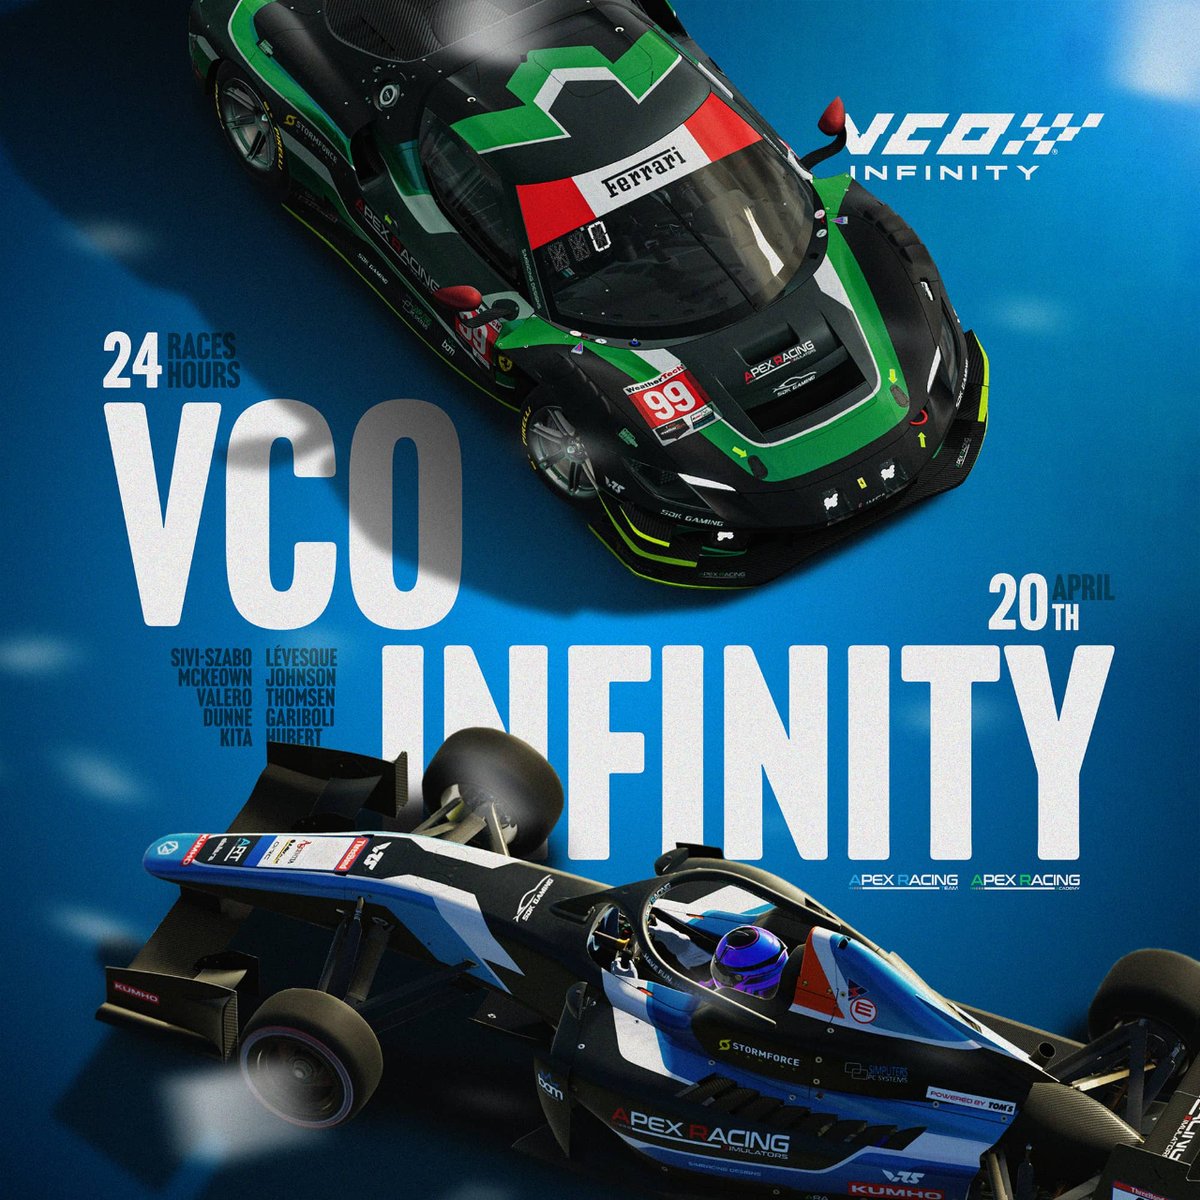 #vcoinfinity - Ready for a BIG weekend! ♾️ 24 hours, 24 races, 5 cars & 5 tracks. Both our teams are set for @vcoesports Infinity!  ⏰ Saturday, 18:00 BST #apexracingteam #iracing